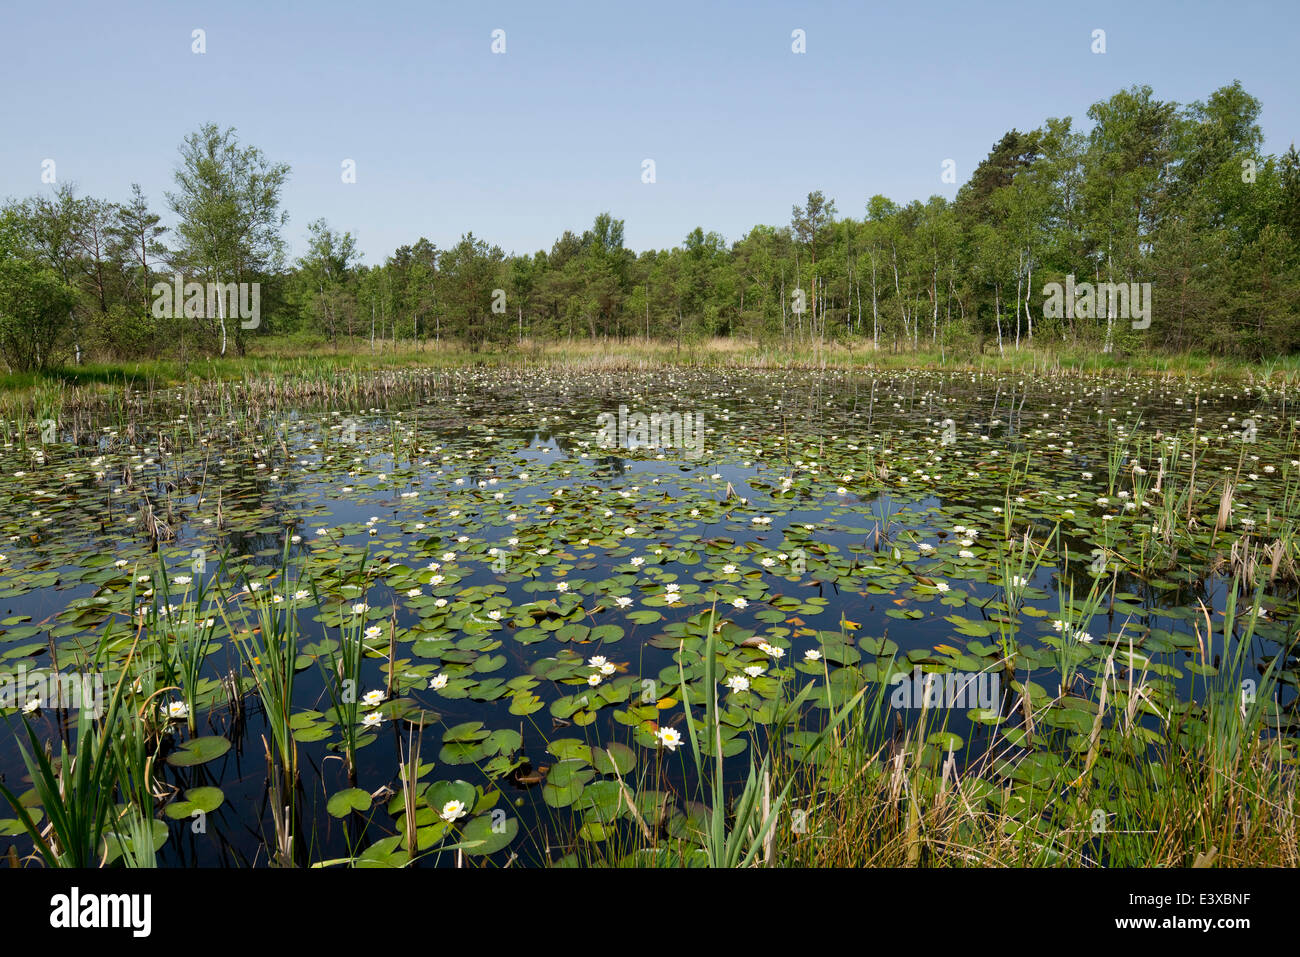 Pond with White Water Lilies (Nymphaea alba), Breites Moor, near Celle, Lower Saxony, Germany Stock Photo